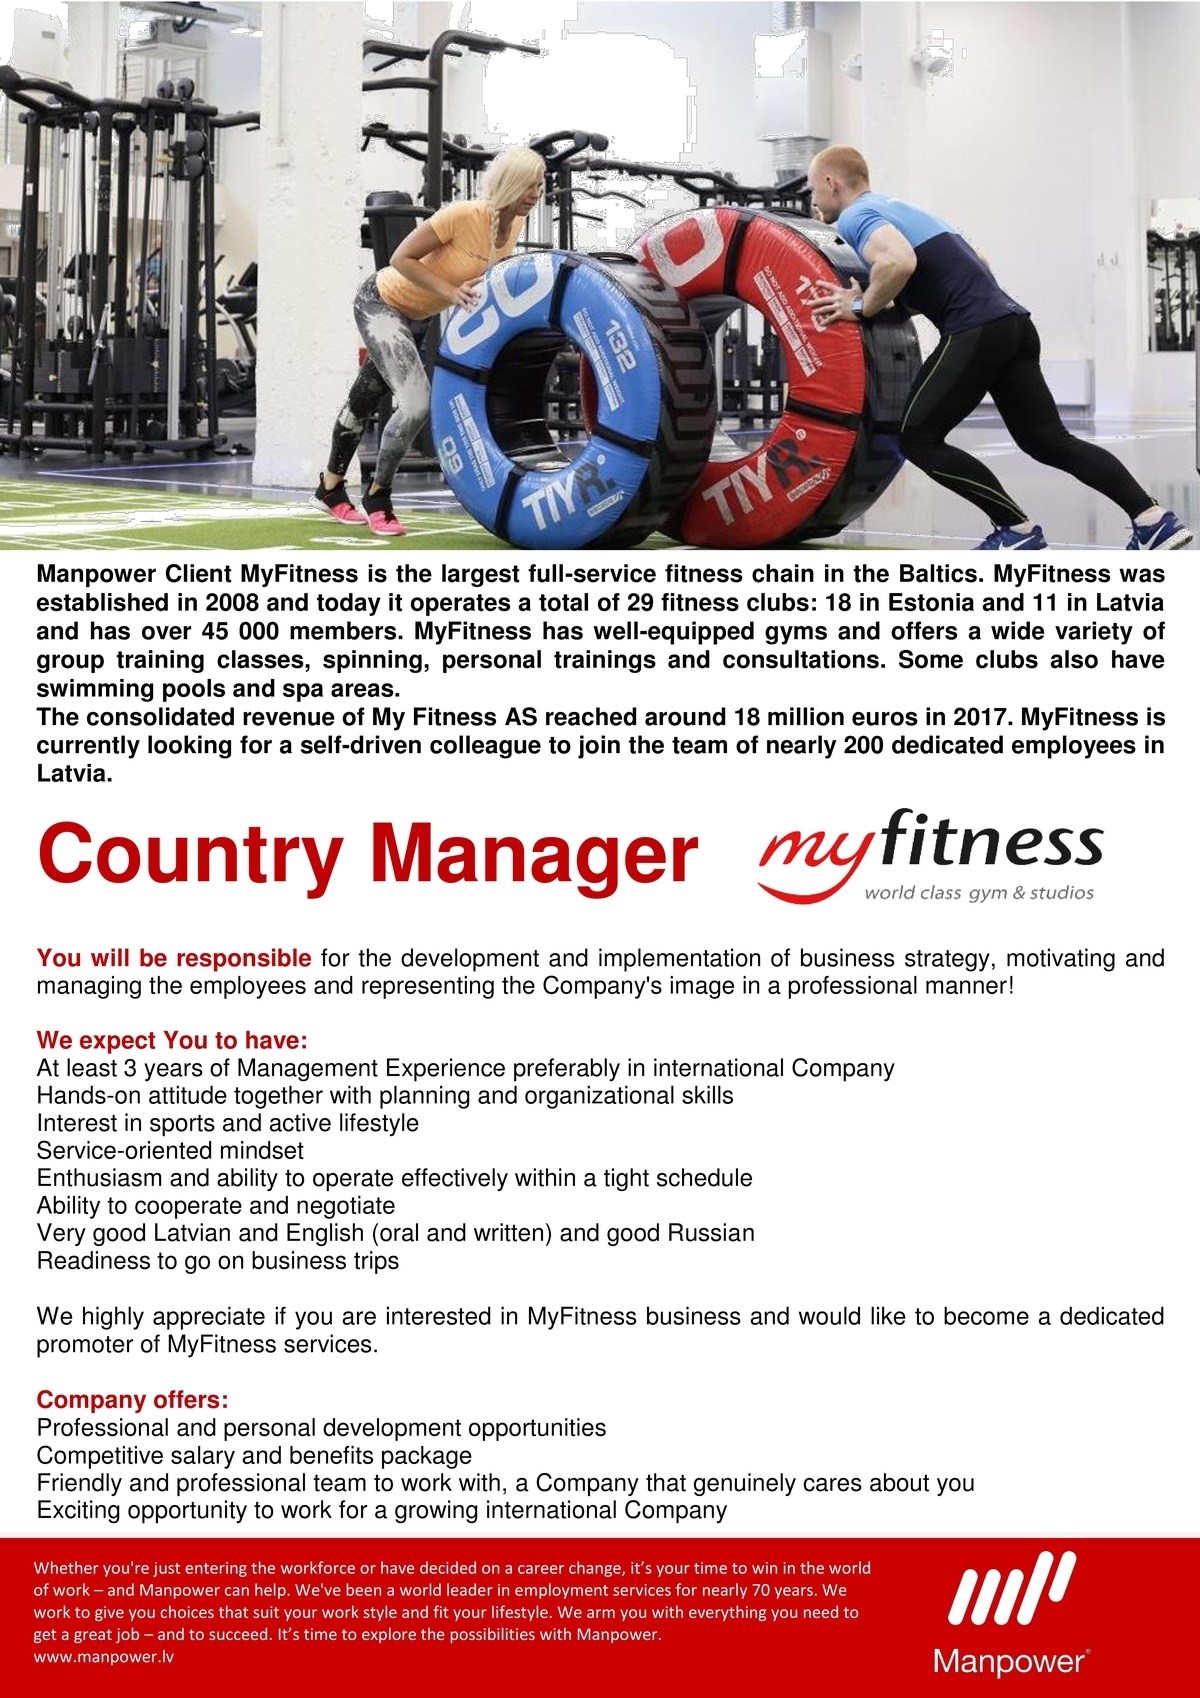 MANPOWER Country Manager